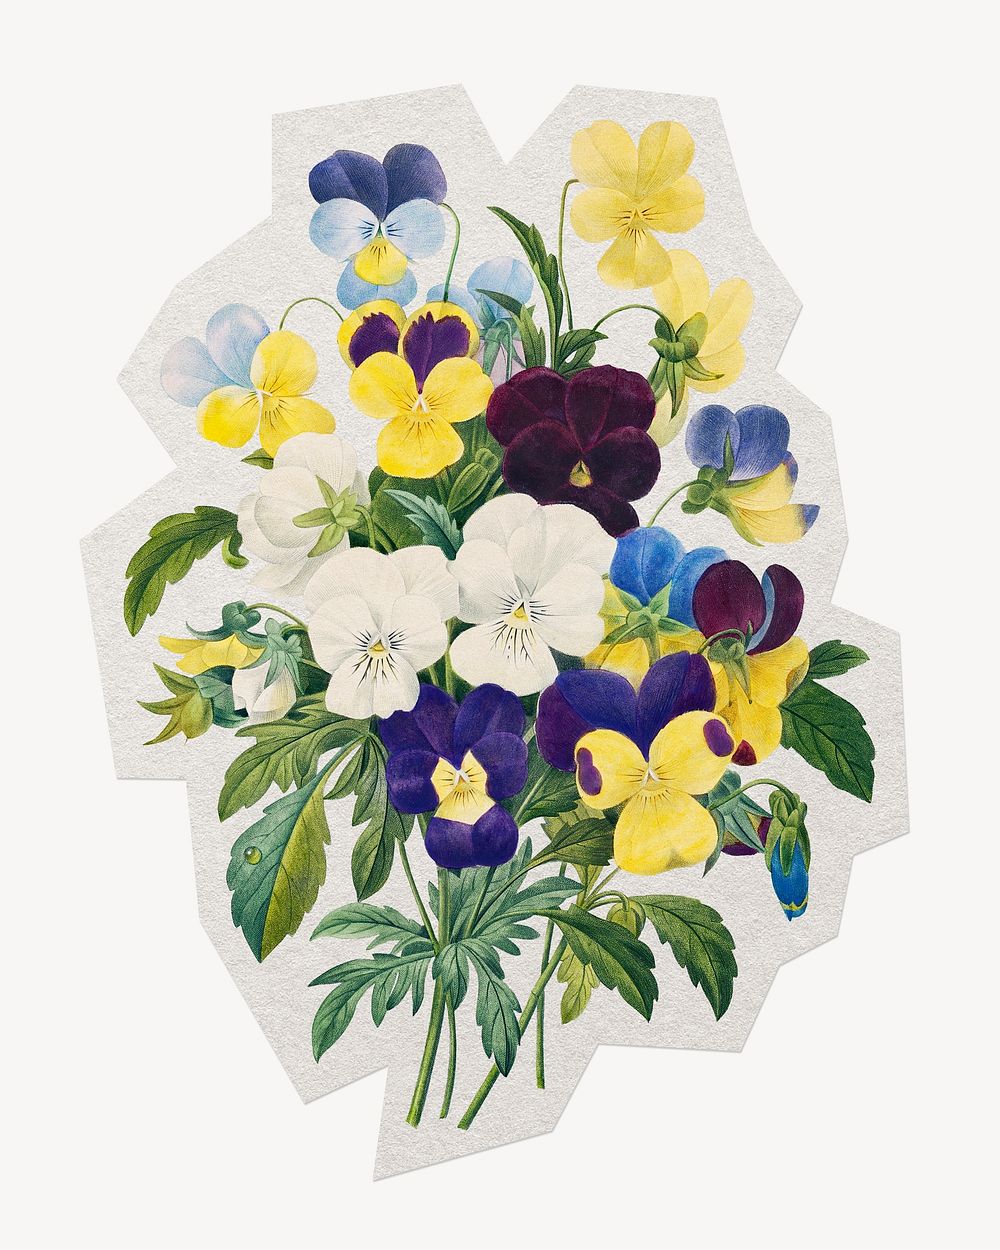 Pansy flower paper element with white border